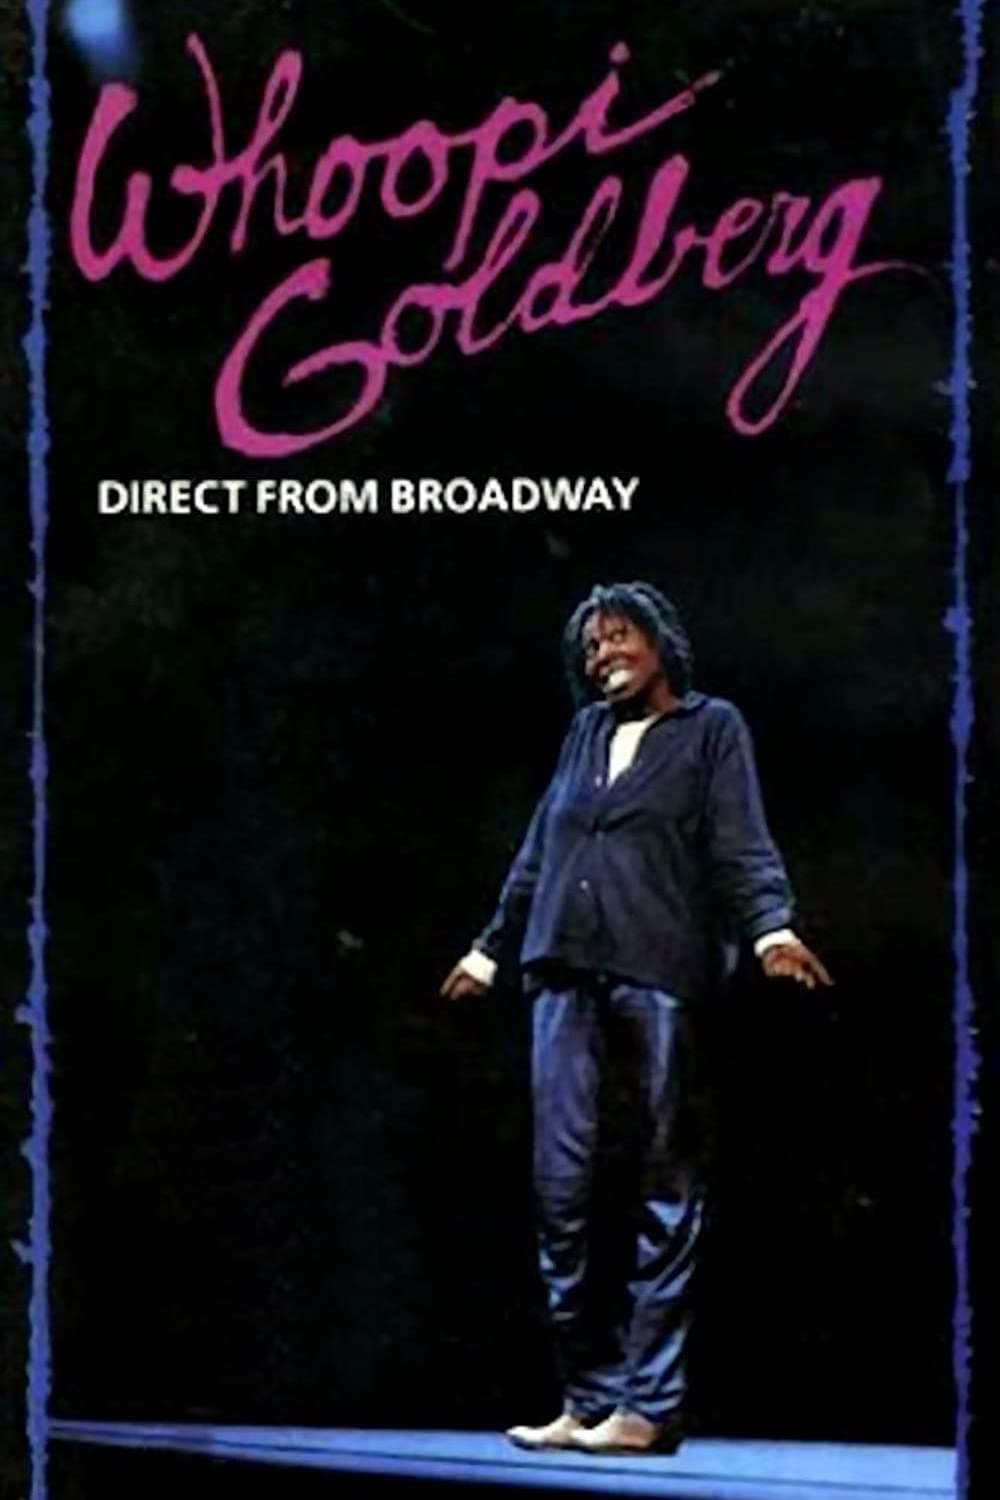 Whoopi Goldberg: Direct from Broadway (1985)